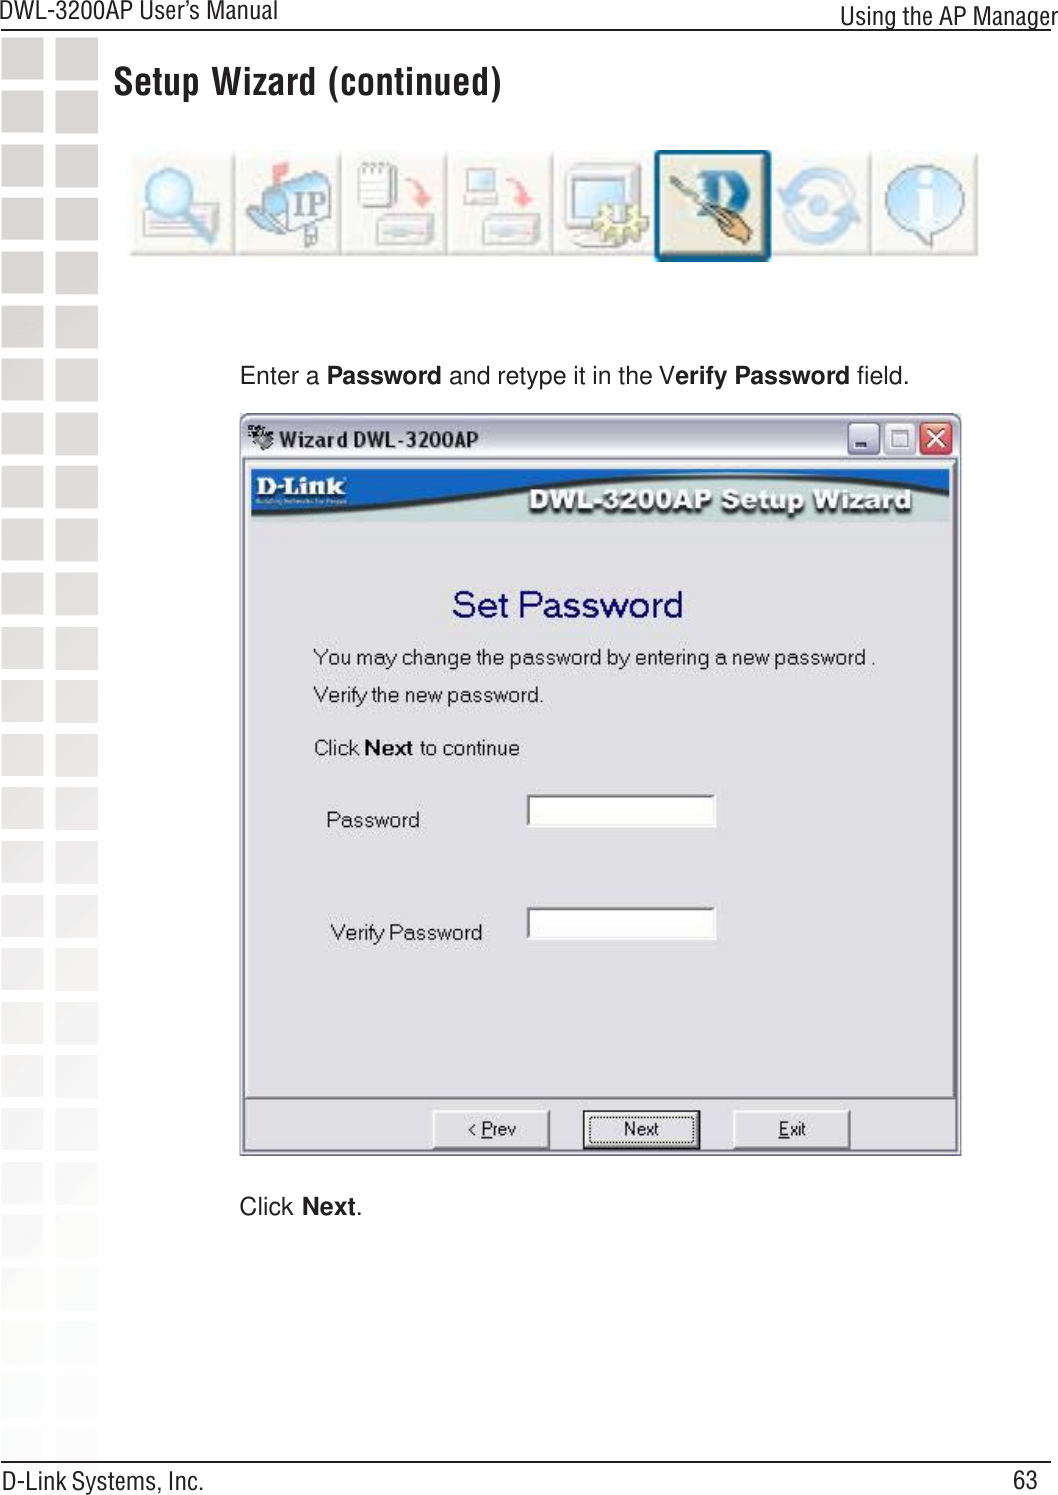 63DWL-3200AP User’s ManualD-Link Systems, Inc.Setup Wizard (continued)Enter a Password and retype it in the Verify Password field.Using the AP ManagerClick Next.